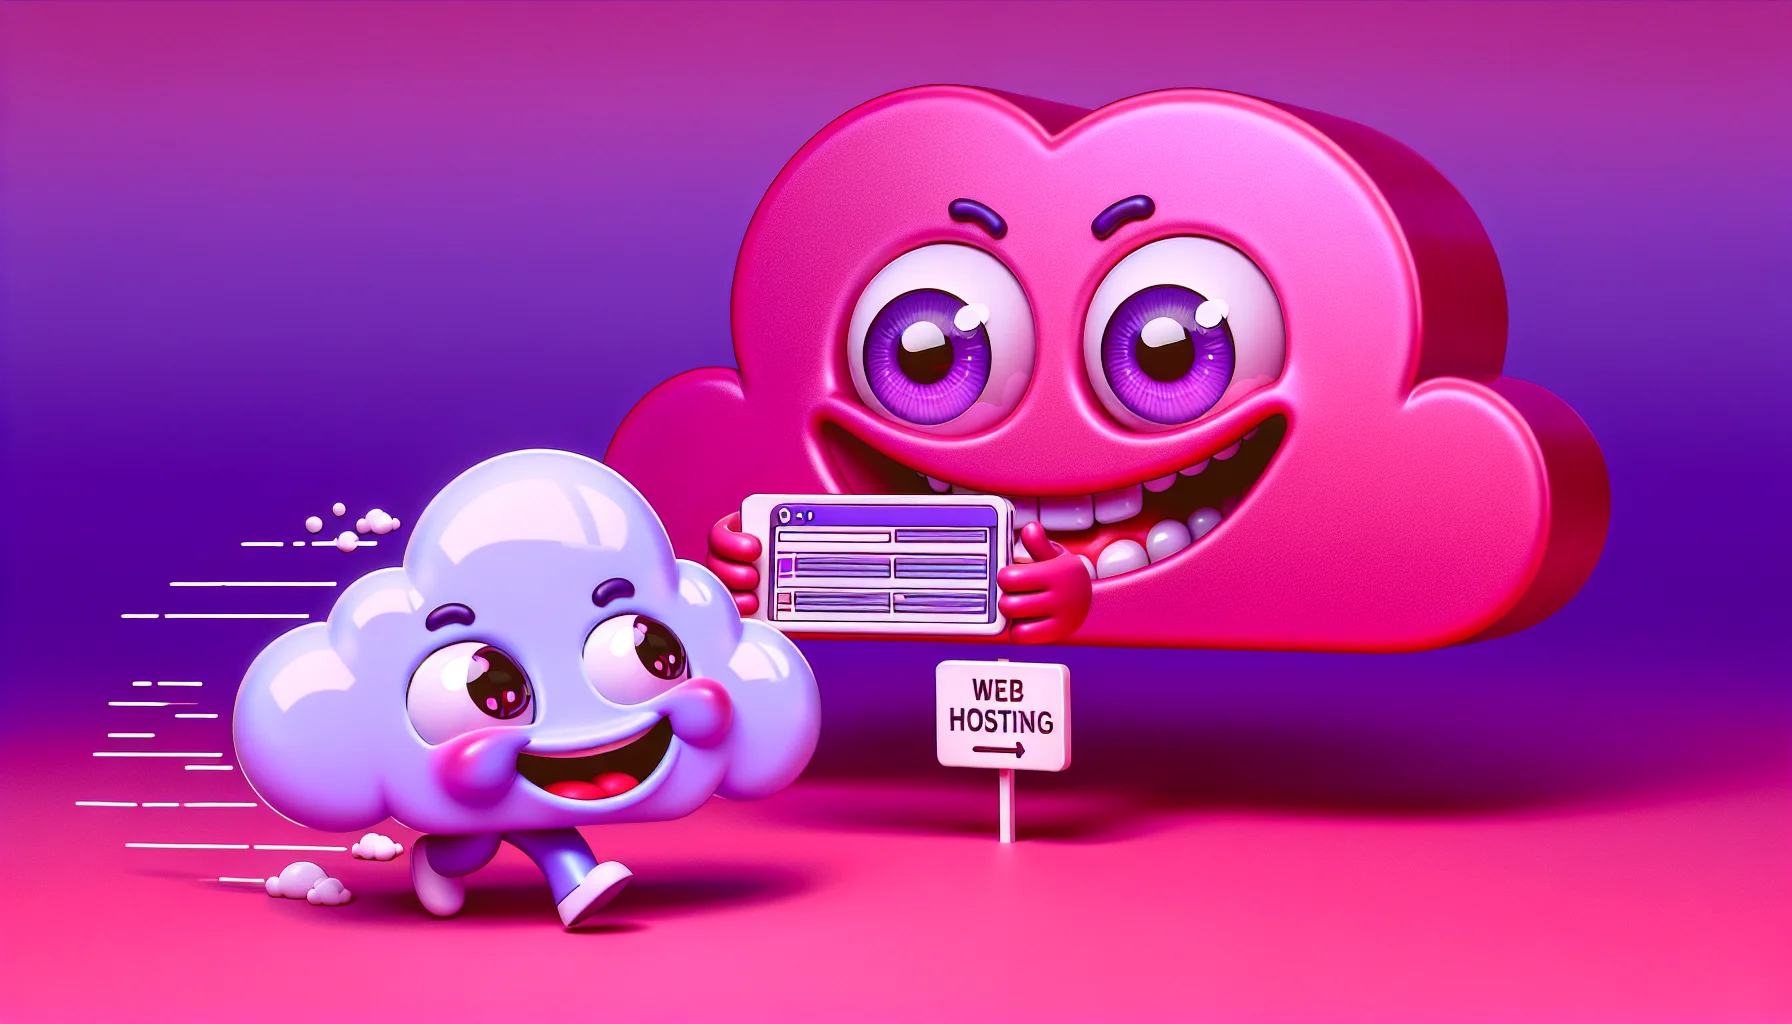 Create a humorous representation of a fictional web design tool, colored predominantly in shades of magenta. A cartoonish scene showing the web design tool, having eyes and a grin, swiftly putting together a website. The digital cloud next to it giggles while it holds a sign saying 'Web Hosting'. The whole scene should emanate a light lighthearted, enticing vibe.